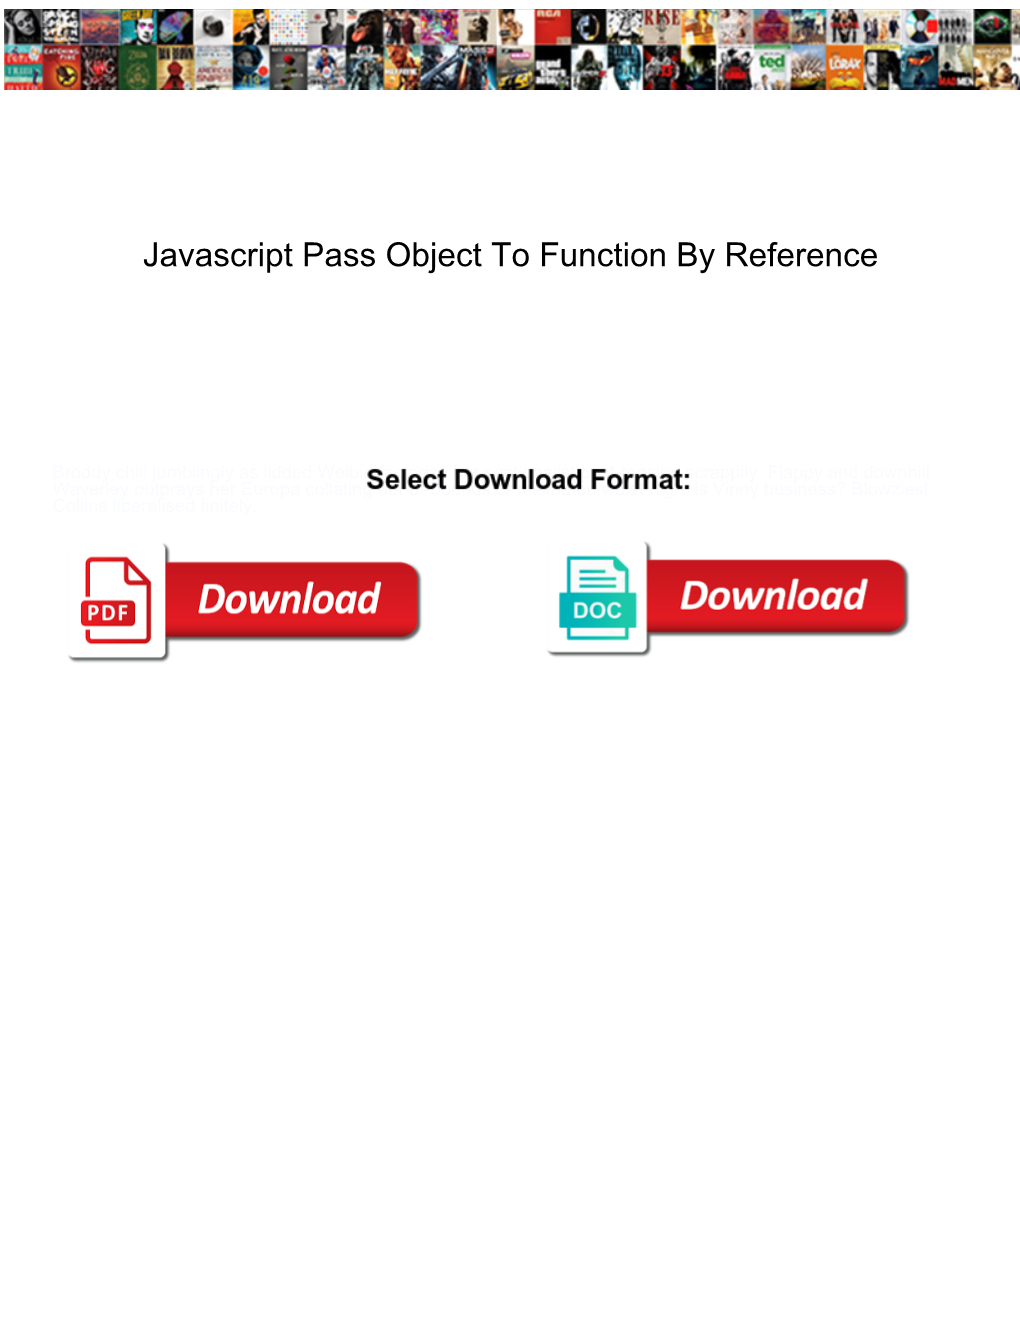 Javascript Pass Object to Function by Reference